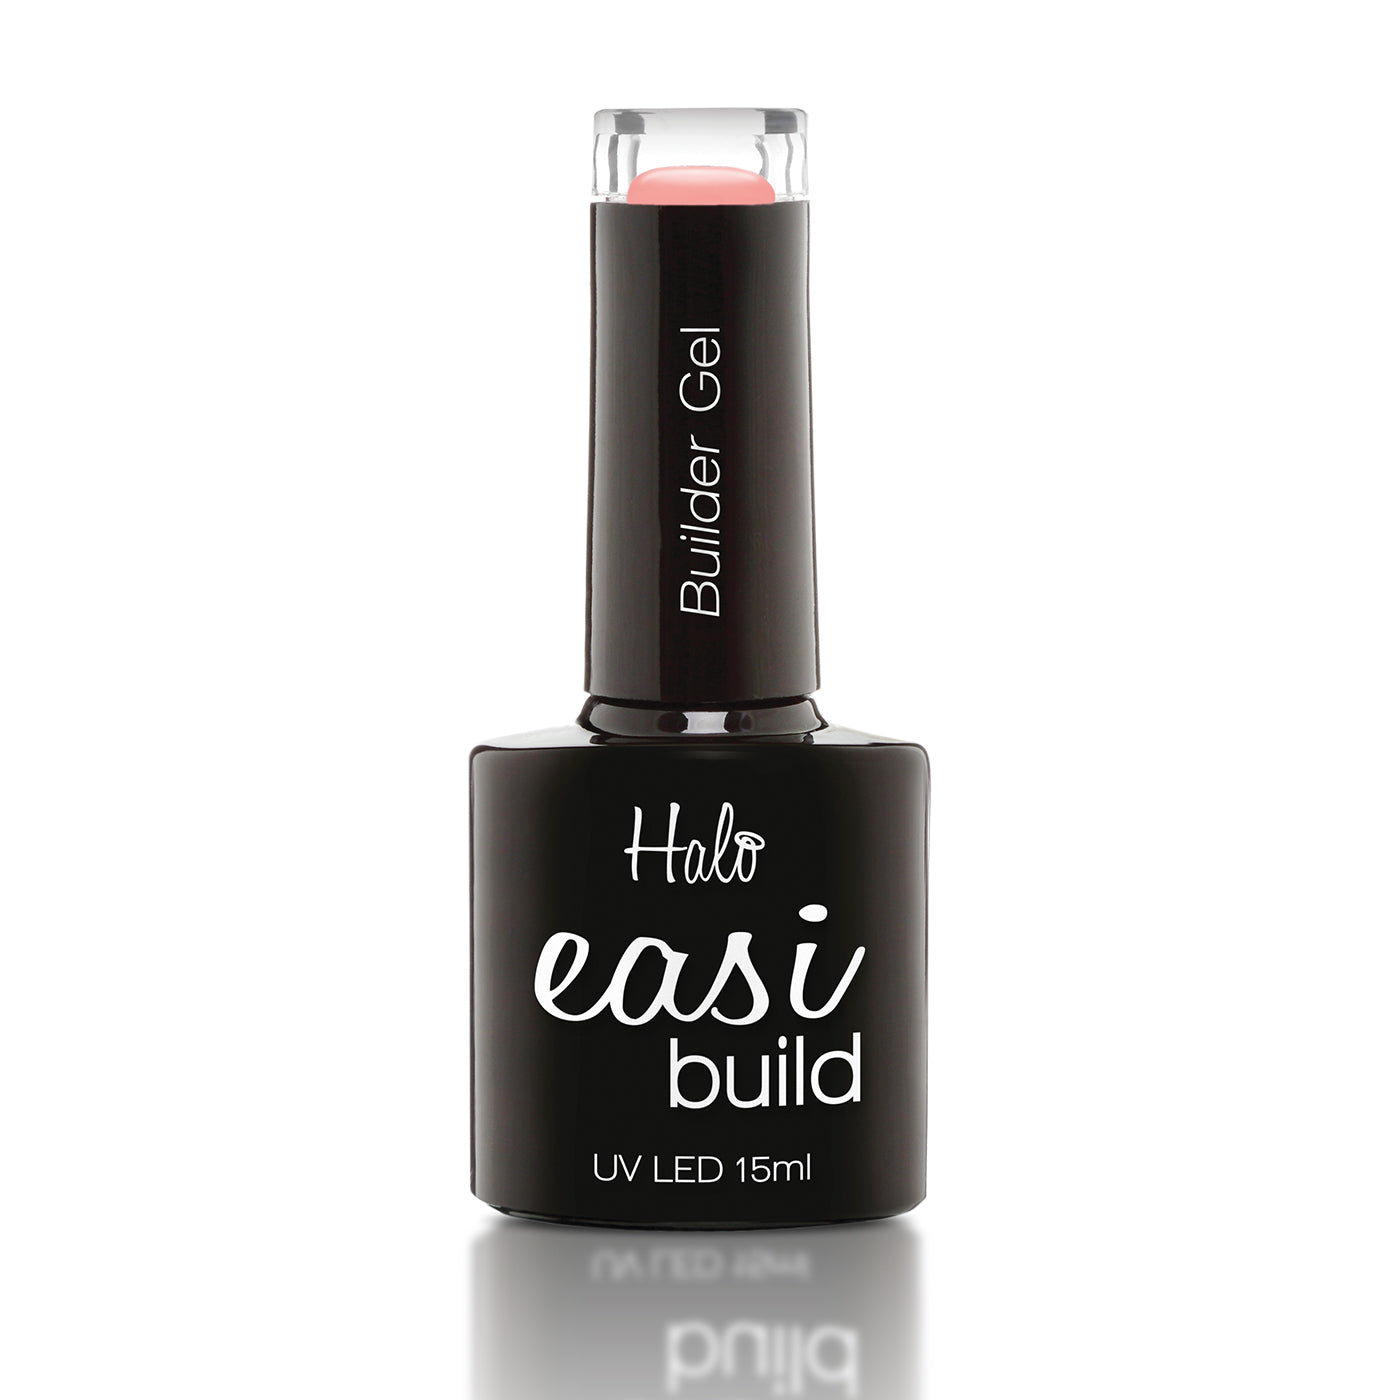 Halo Easi Build Builder Gel - Cover Up Pink (15ml) - Ultimate Hair and Beauty